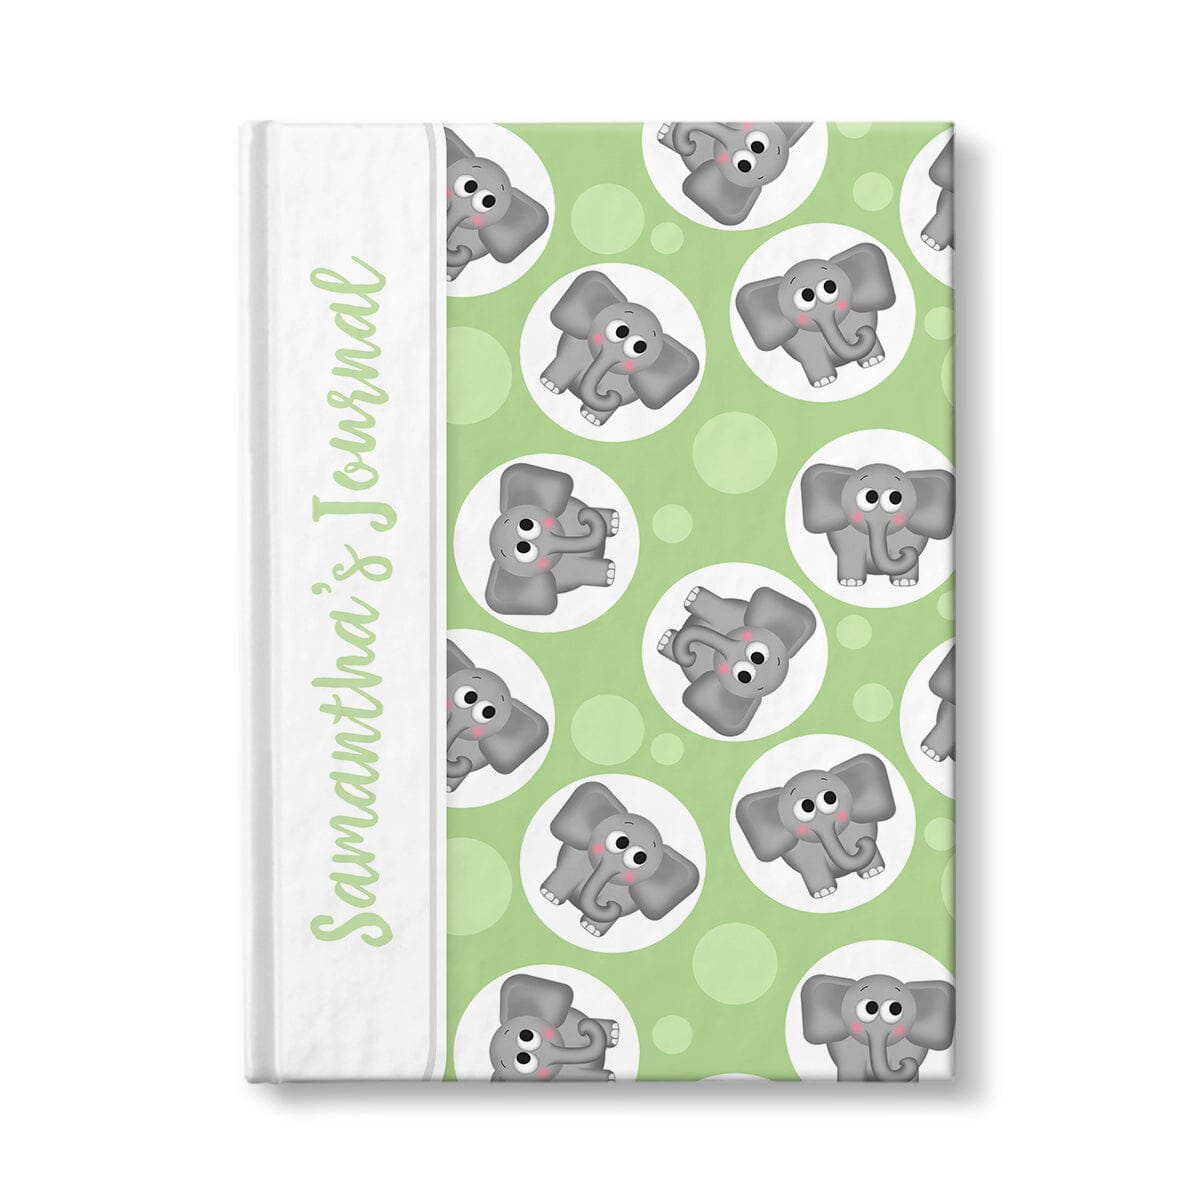 Personalized Cute Green Elephant Journal at Artistically Invited.